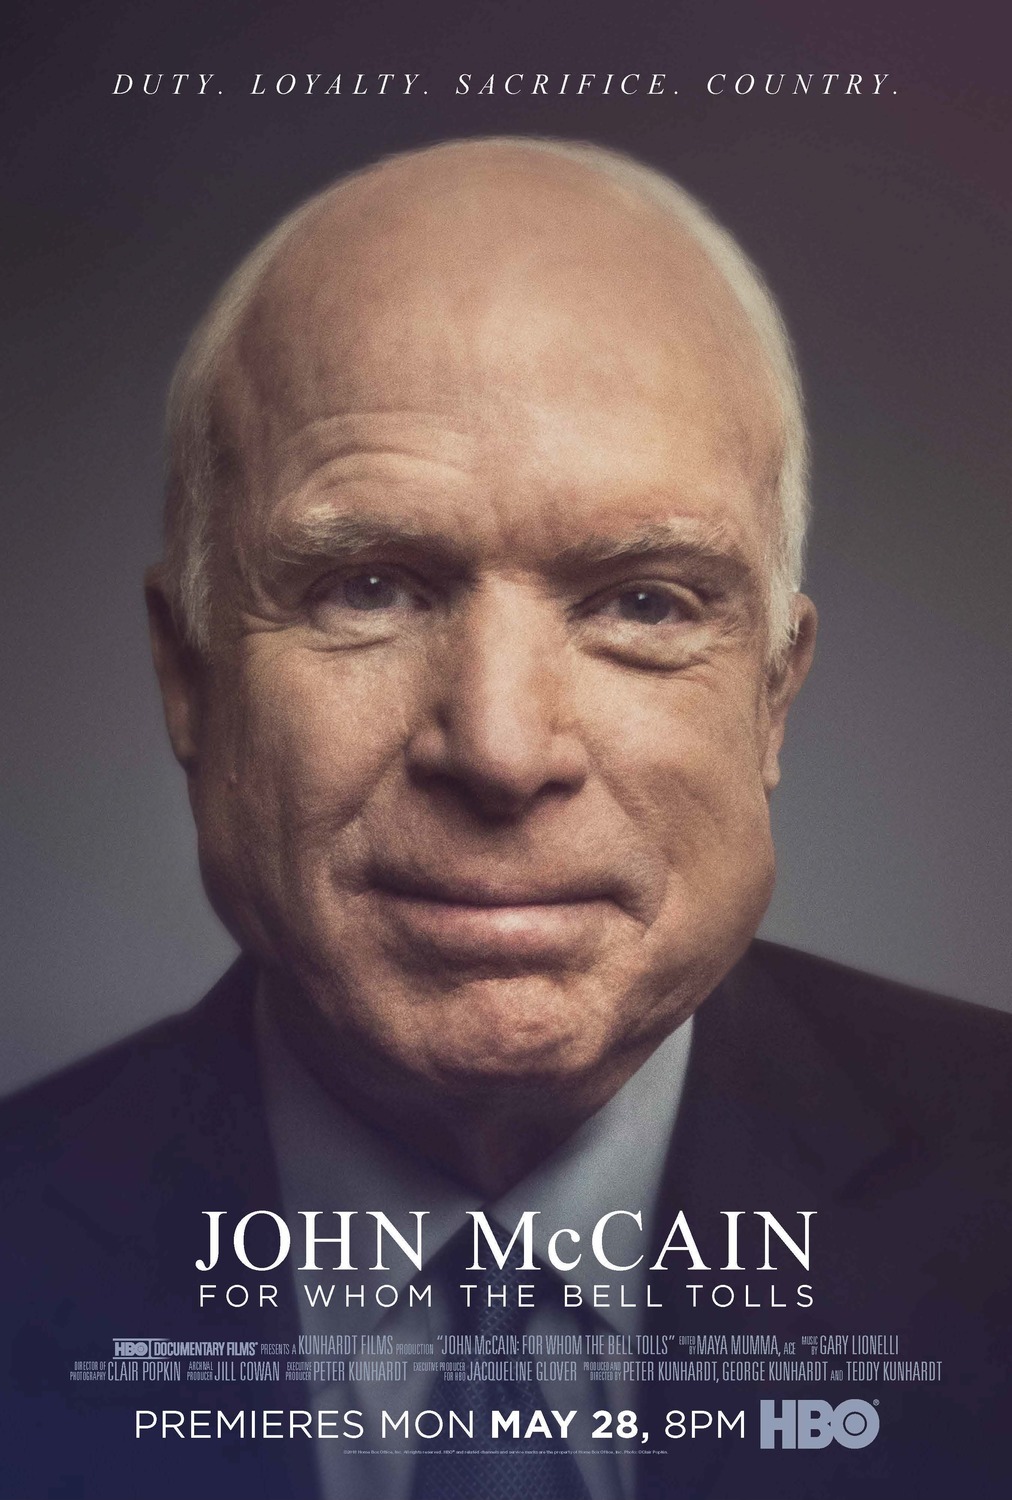 Extra Large TV Poster Image for John McCain: For Whom the Bell Tolls 